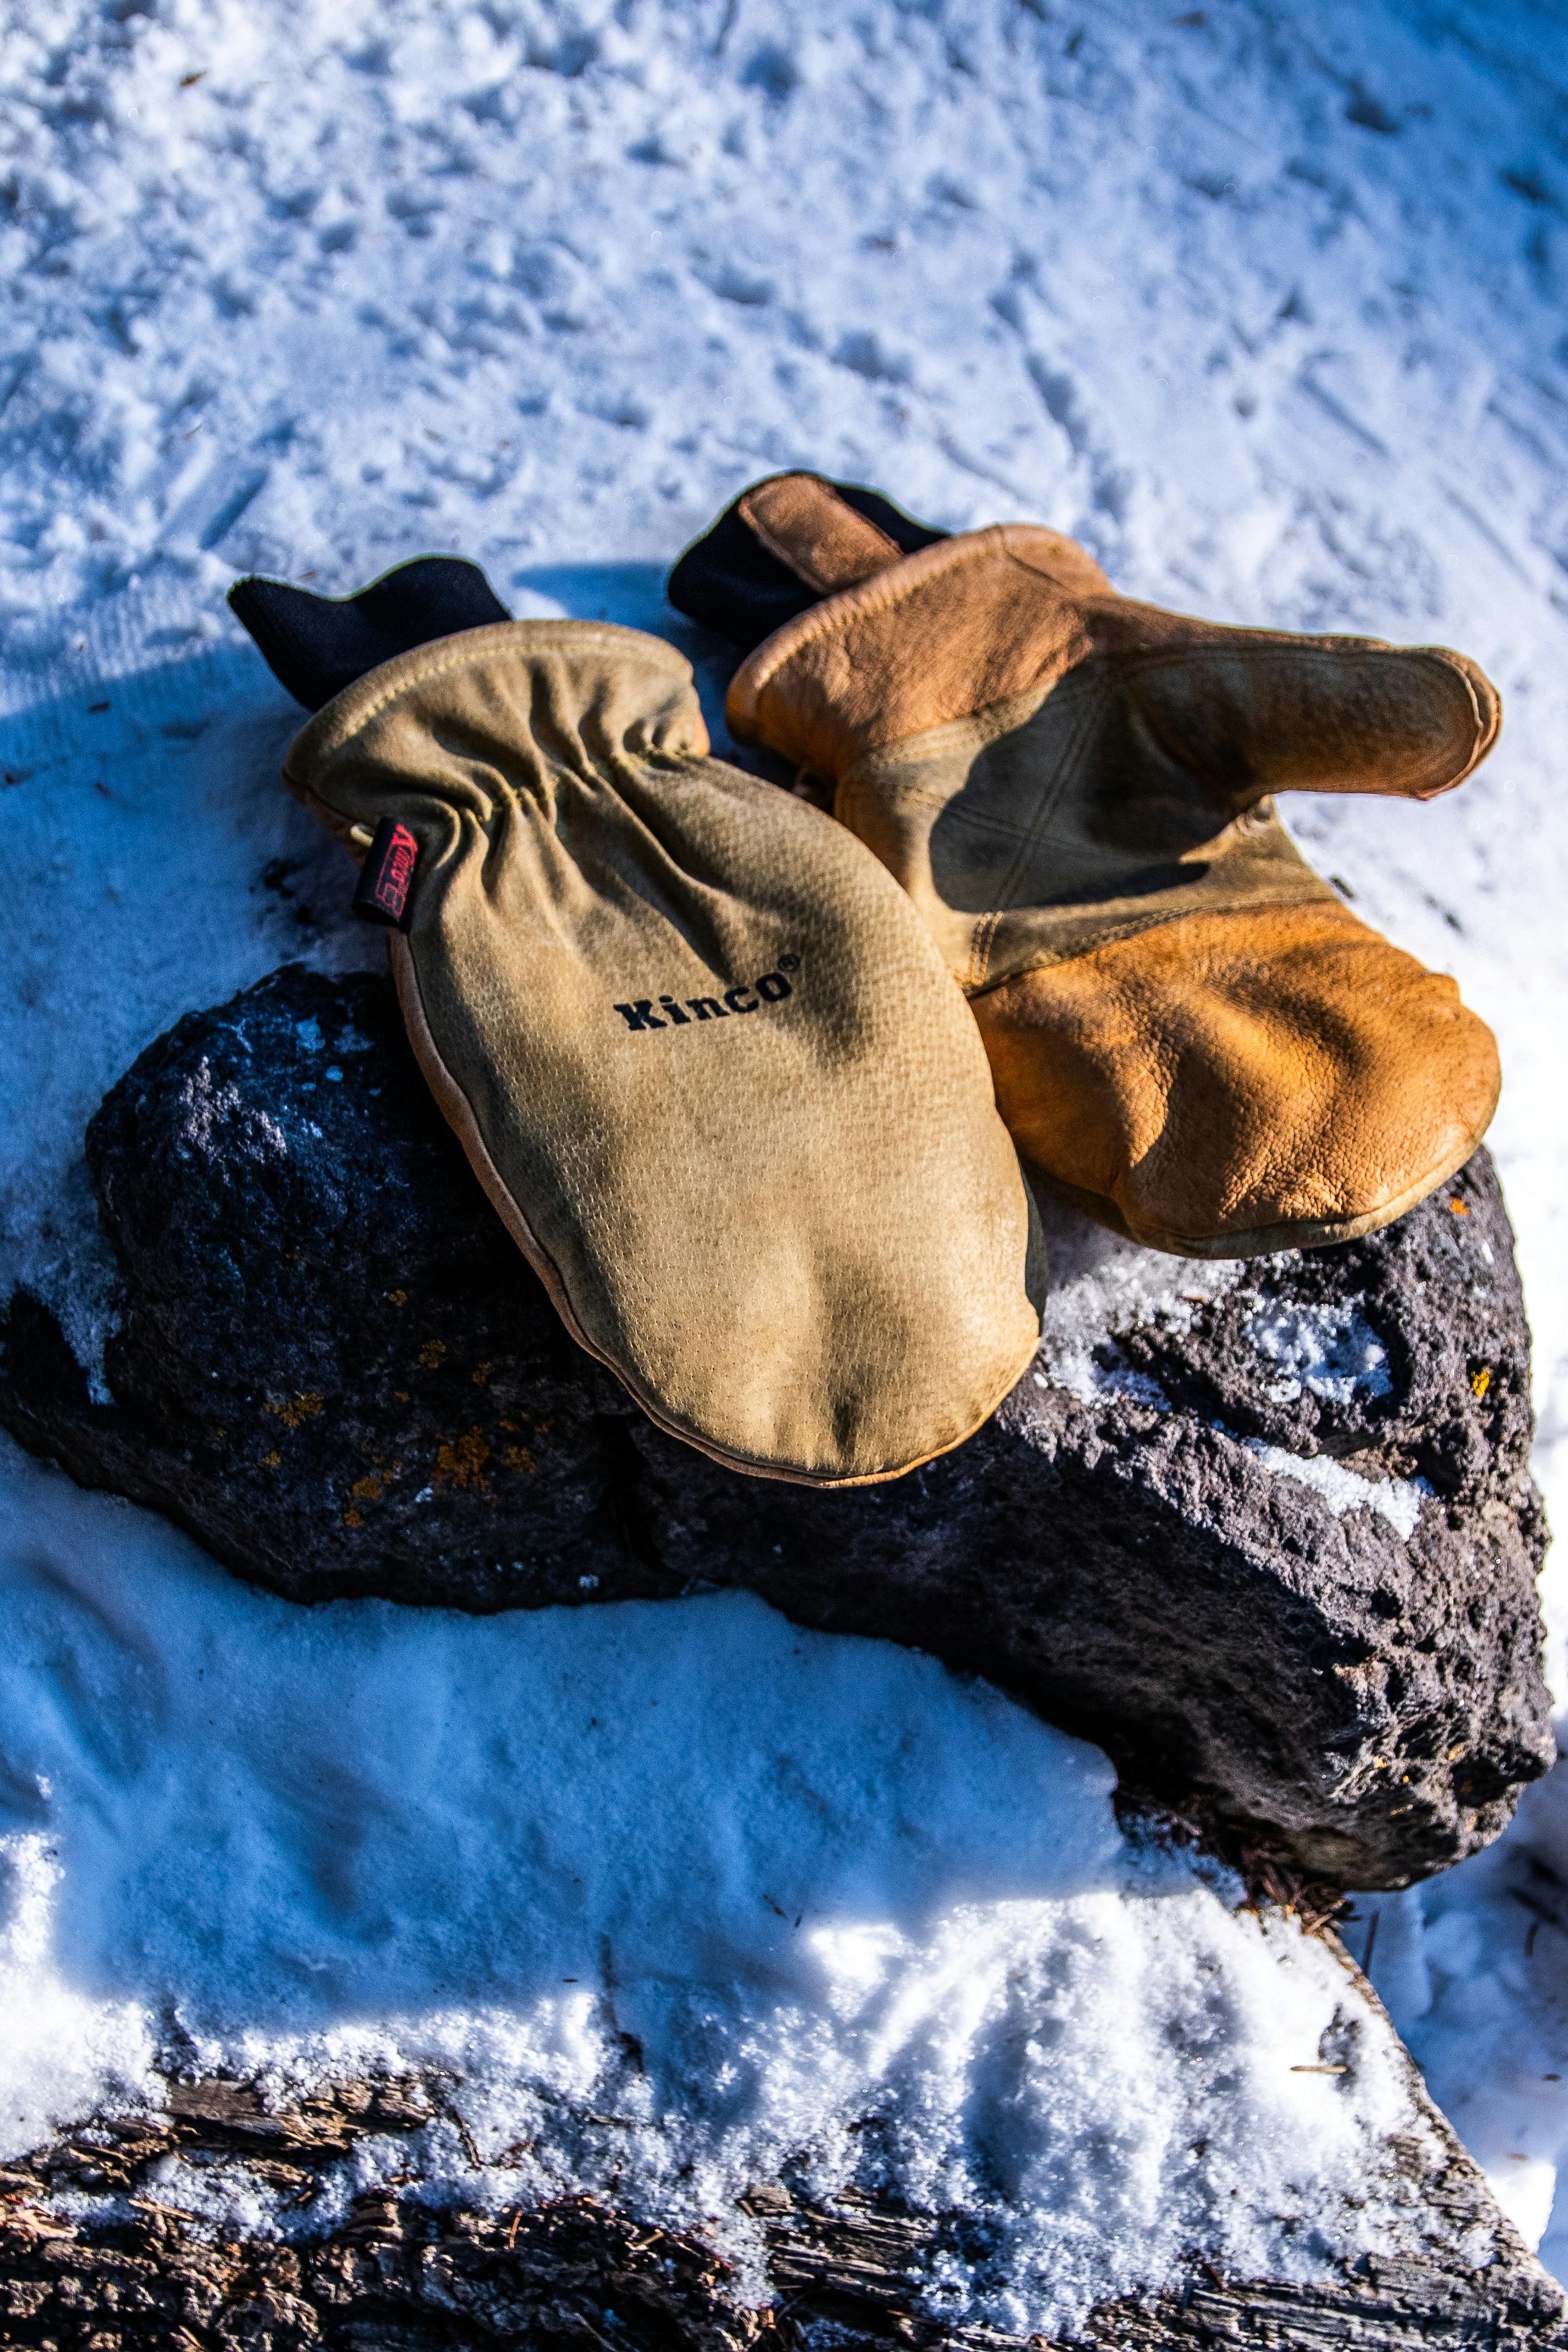 A pair of mittens sit on a rock in the snow.